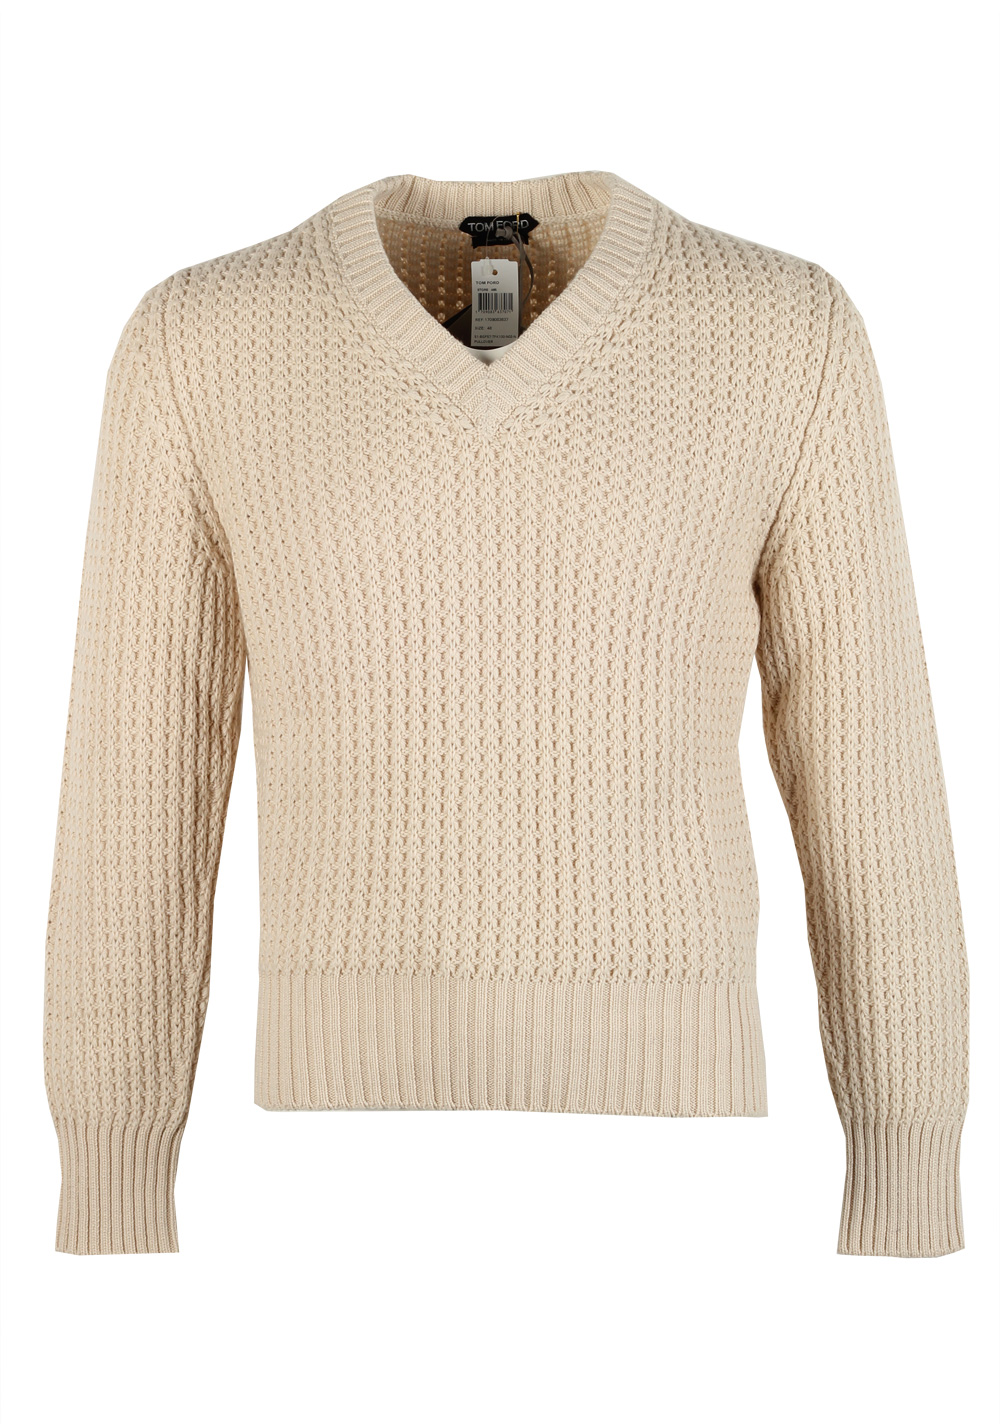 TOM FORD Off White V Neck Sweater Size 48 / 38R U.S. In Cotton Cashmere | Costume Limité